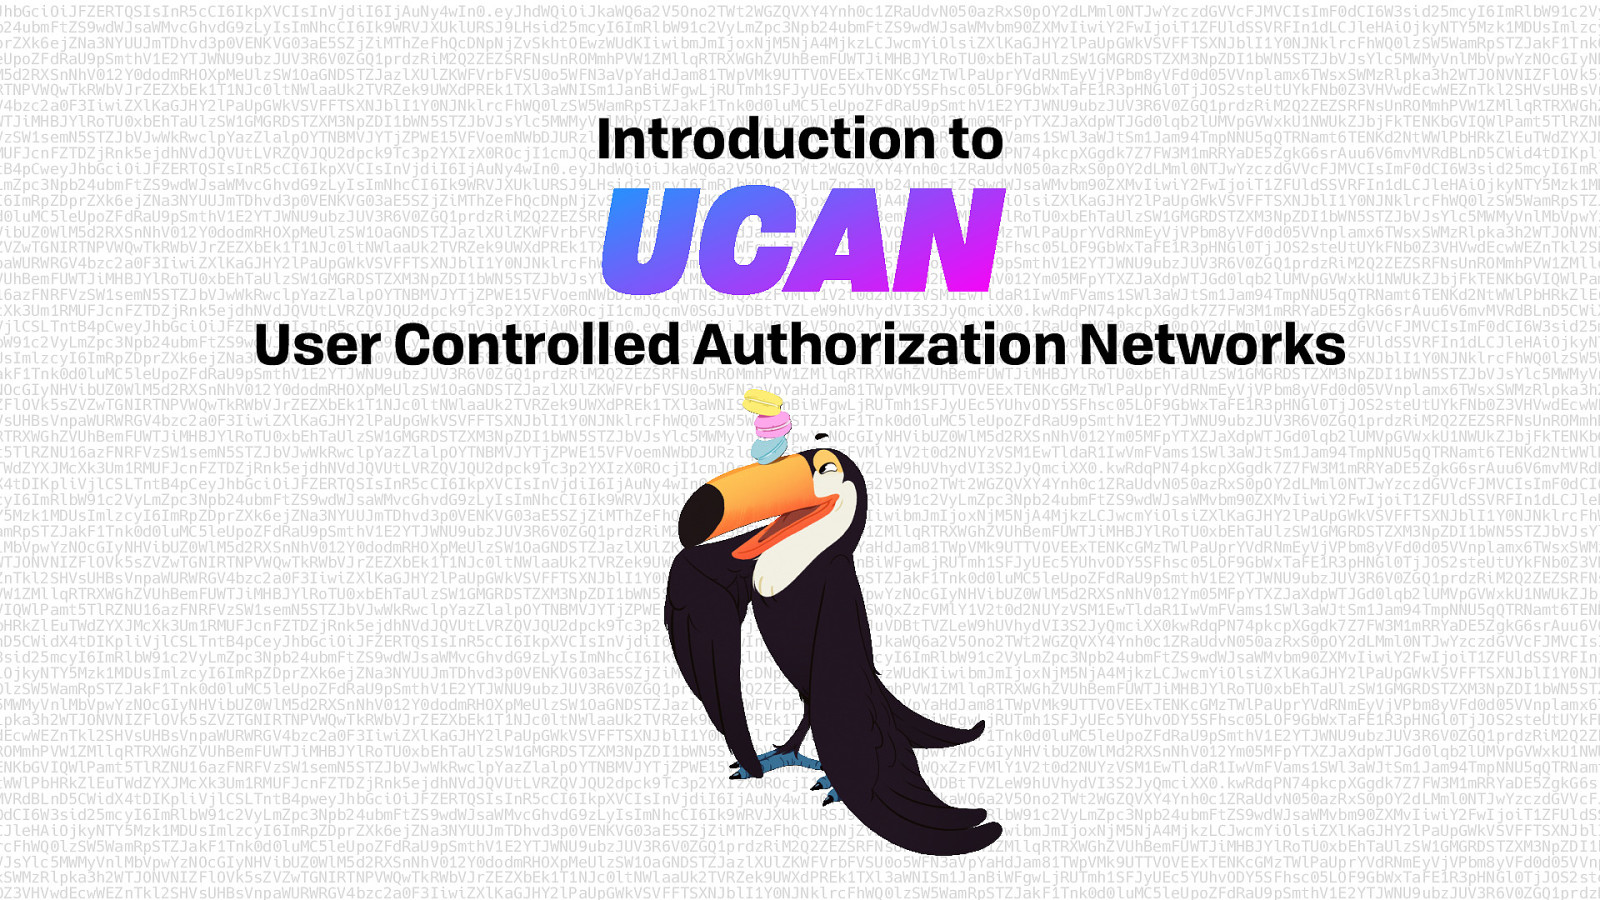 An Introduction to UCAN